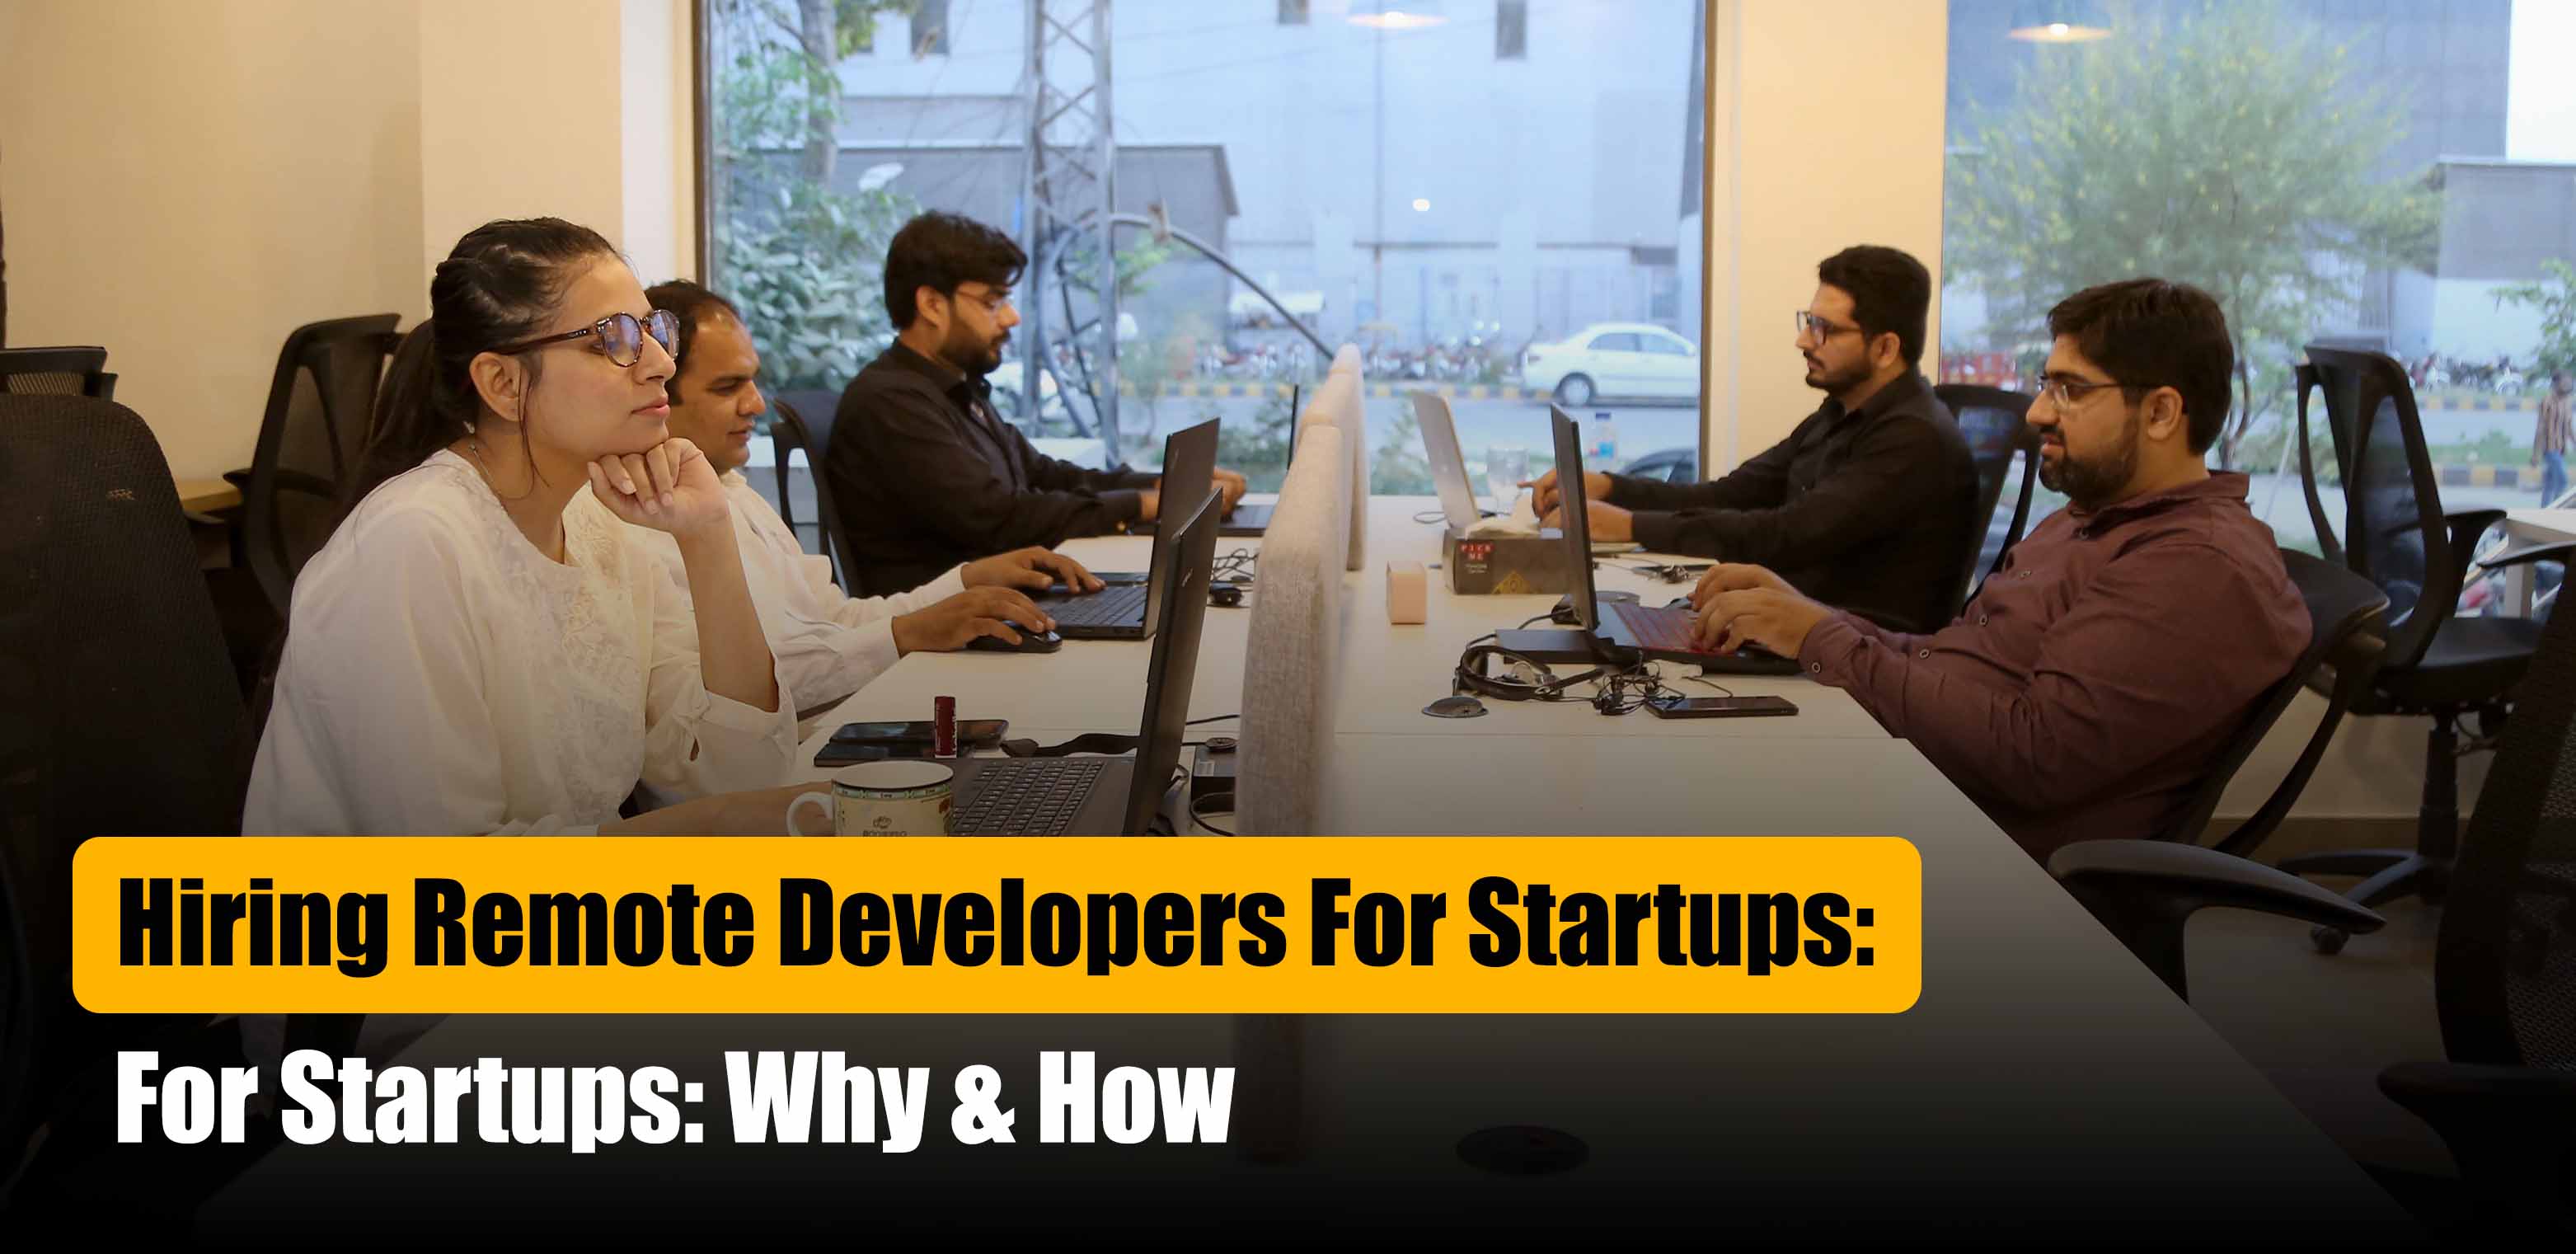 Hiring Remote Developers for Startups: Why & How